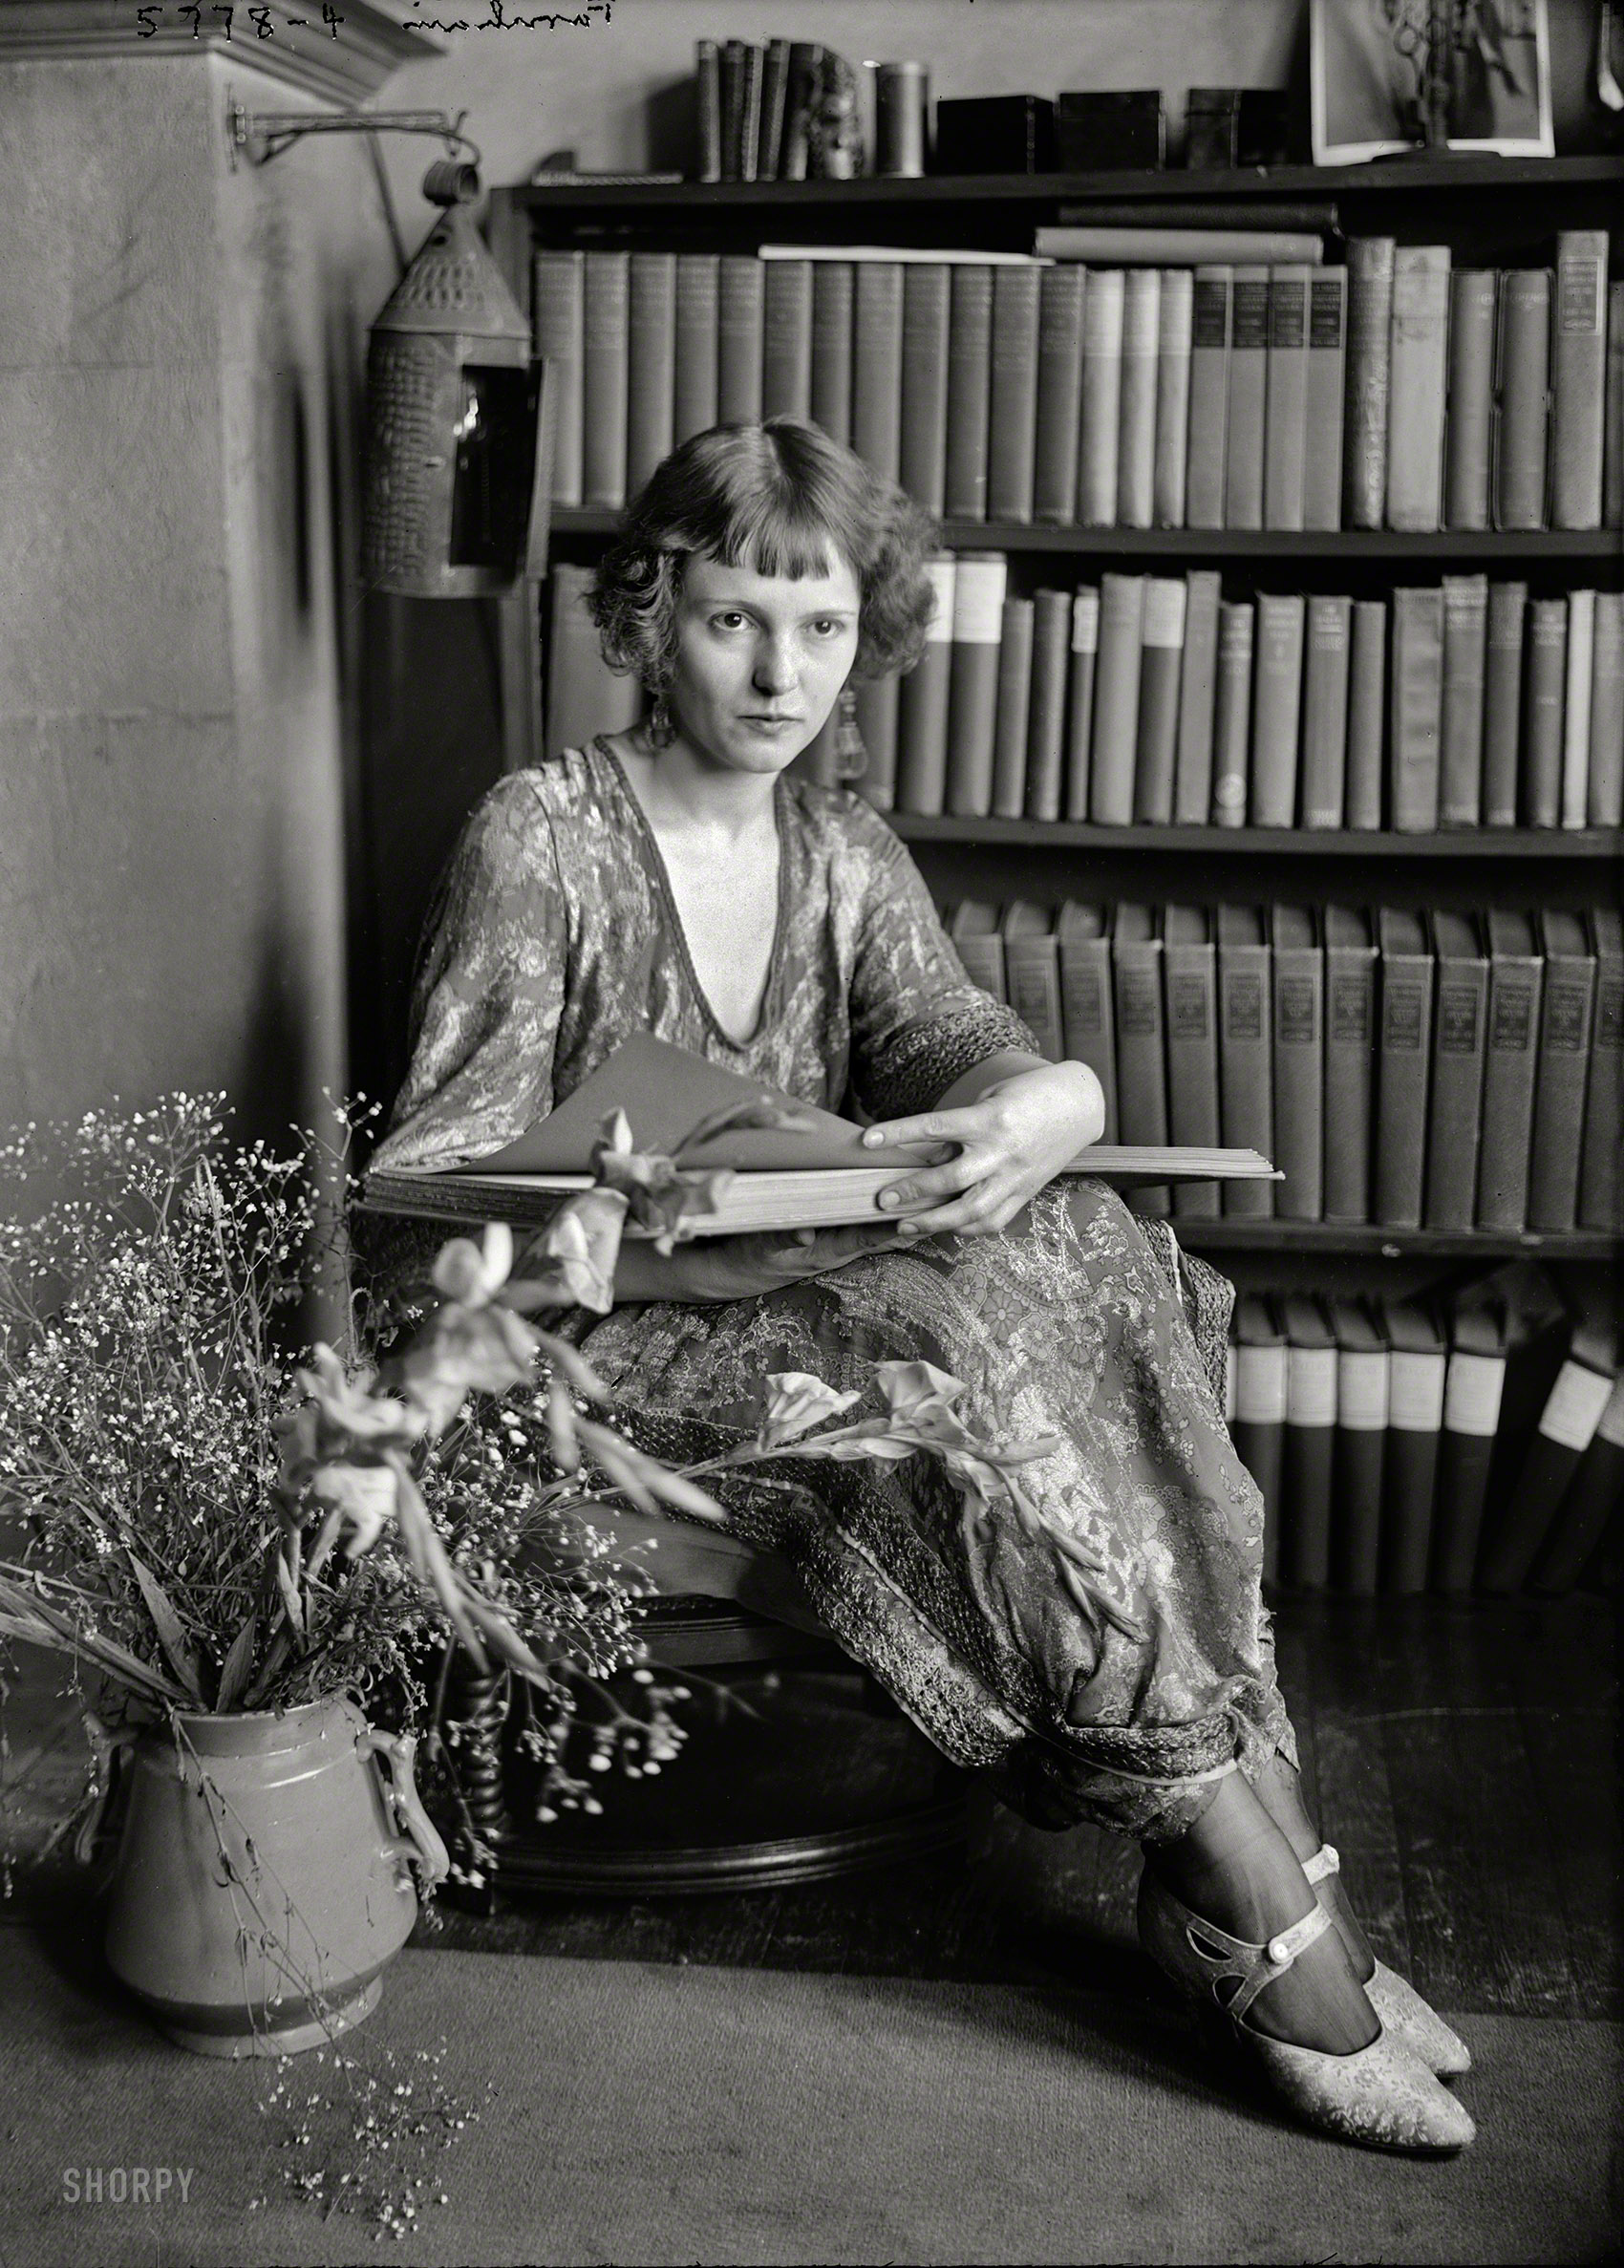 New York circa 1922. A label transcribed as "Farraham" semi-identifies this enigmatic lady, last seen here. Bain News Service glass negative. View full size.